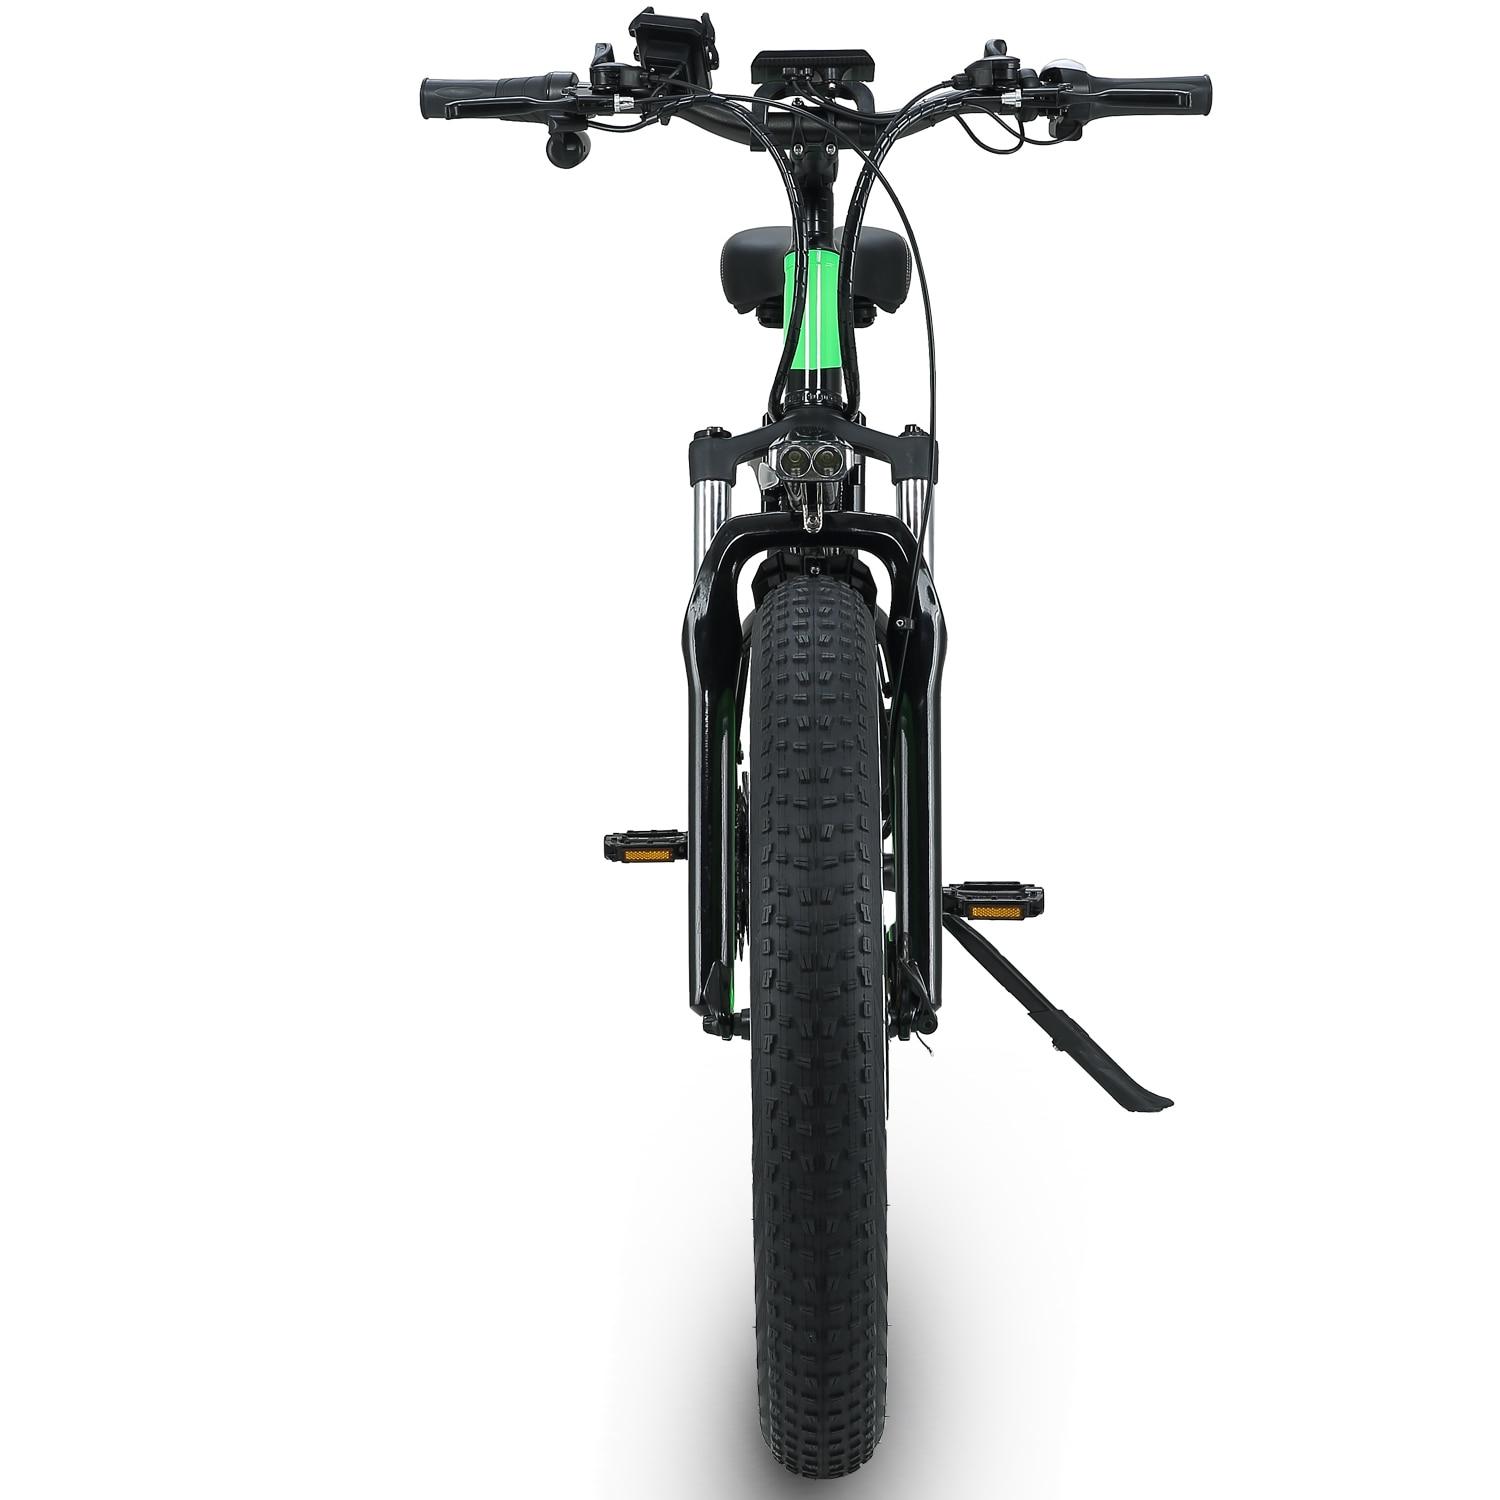 1000W Portable Electric Bicycle 26 Inch 48V Motor 13ah Lithium Battery Ebike Pedal Assist Foldable Mountain City Travel Bike